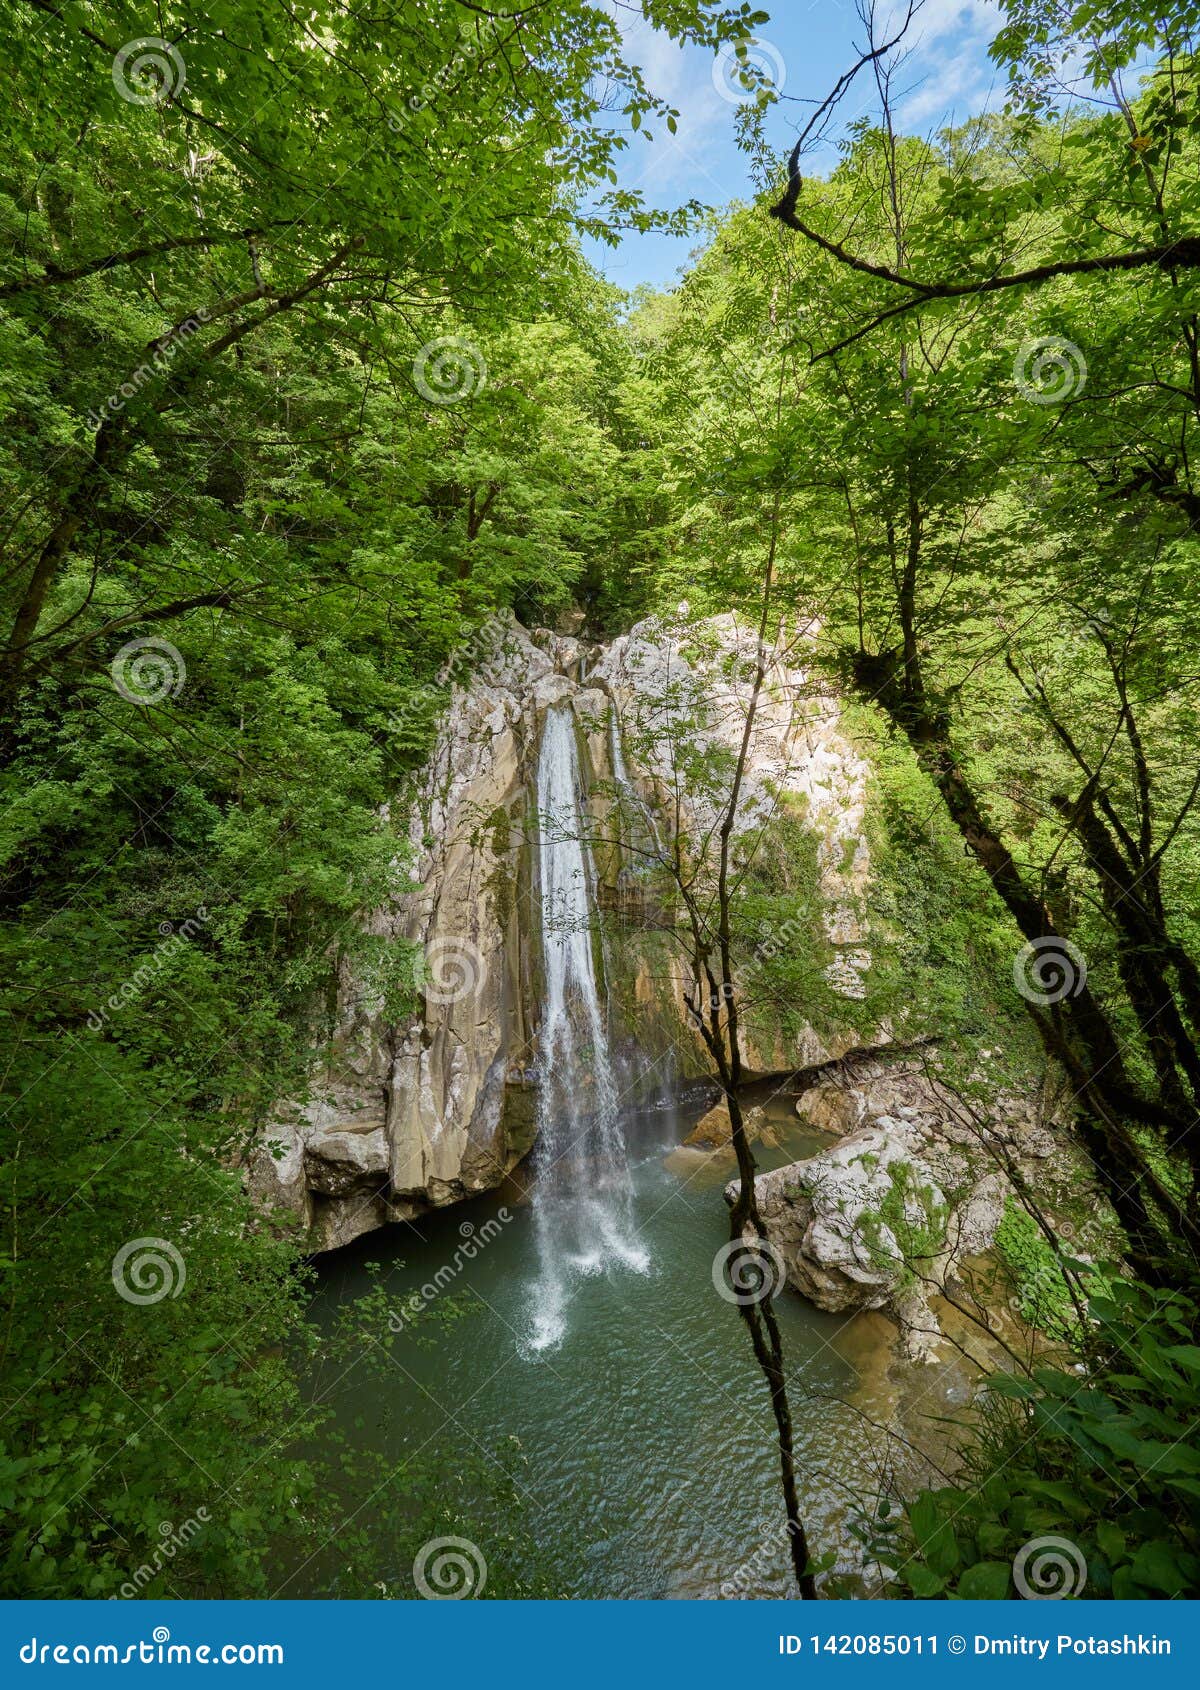 A High Waterfall Falls from a Cliff into a Clear Lake Stock Image ...